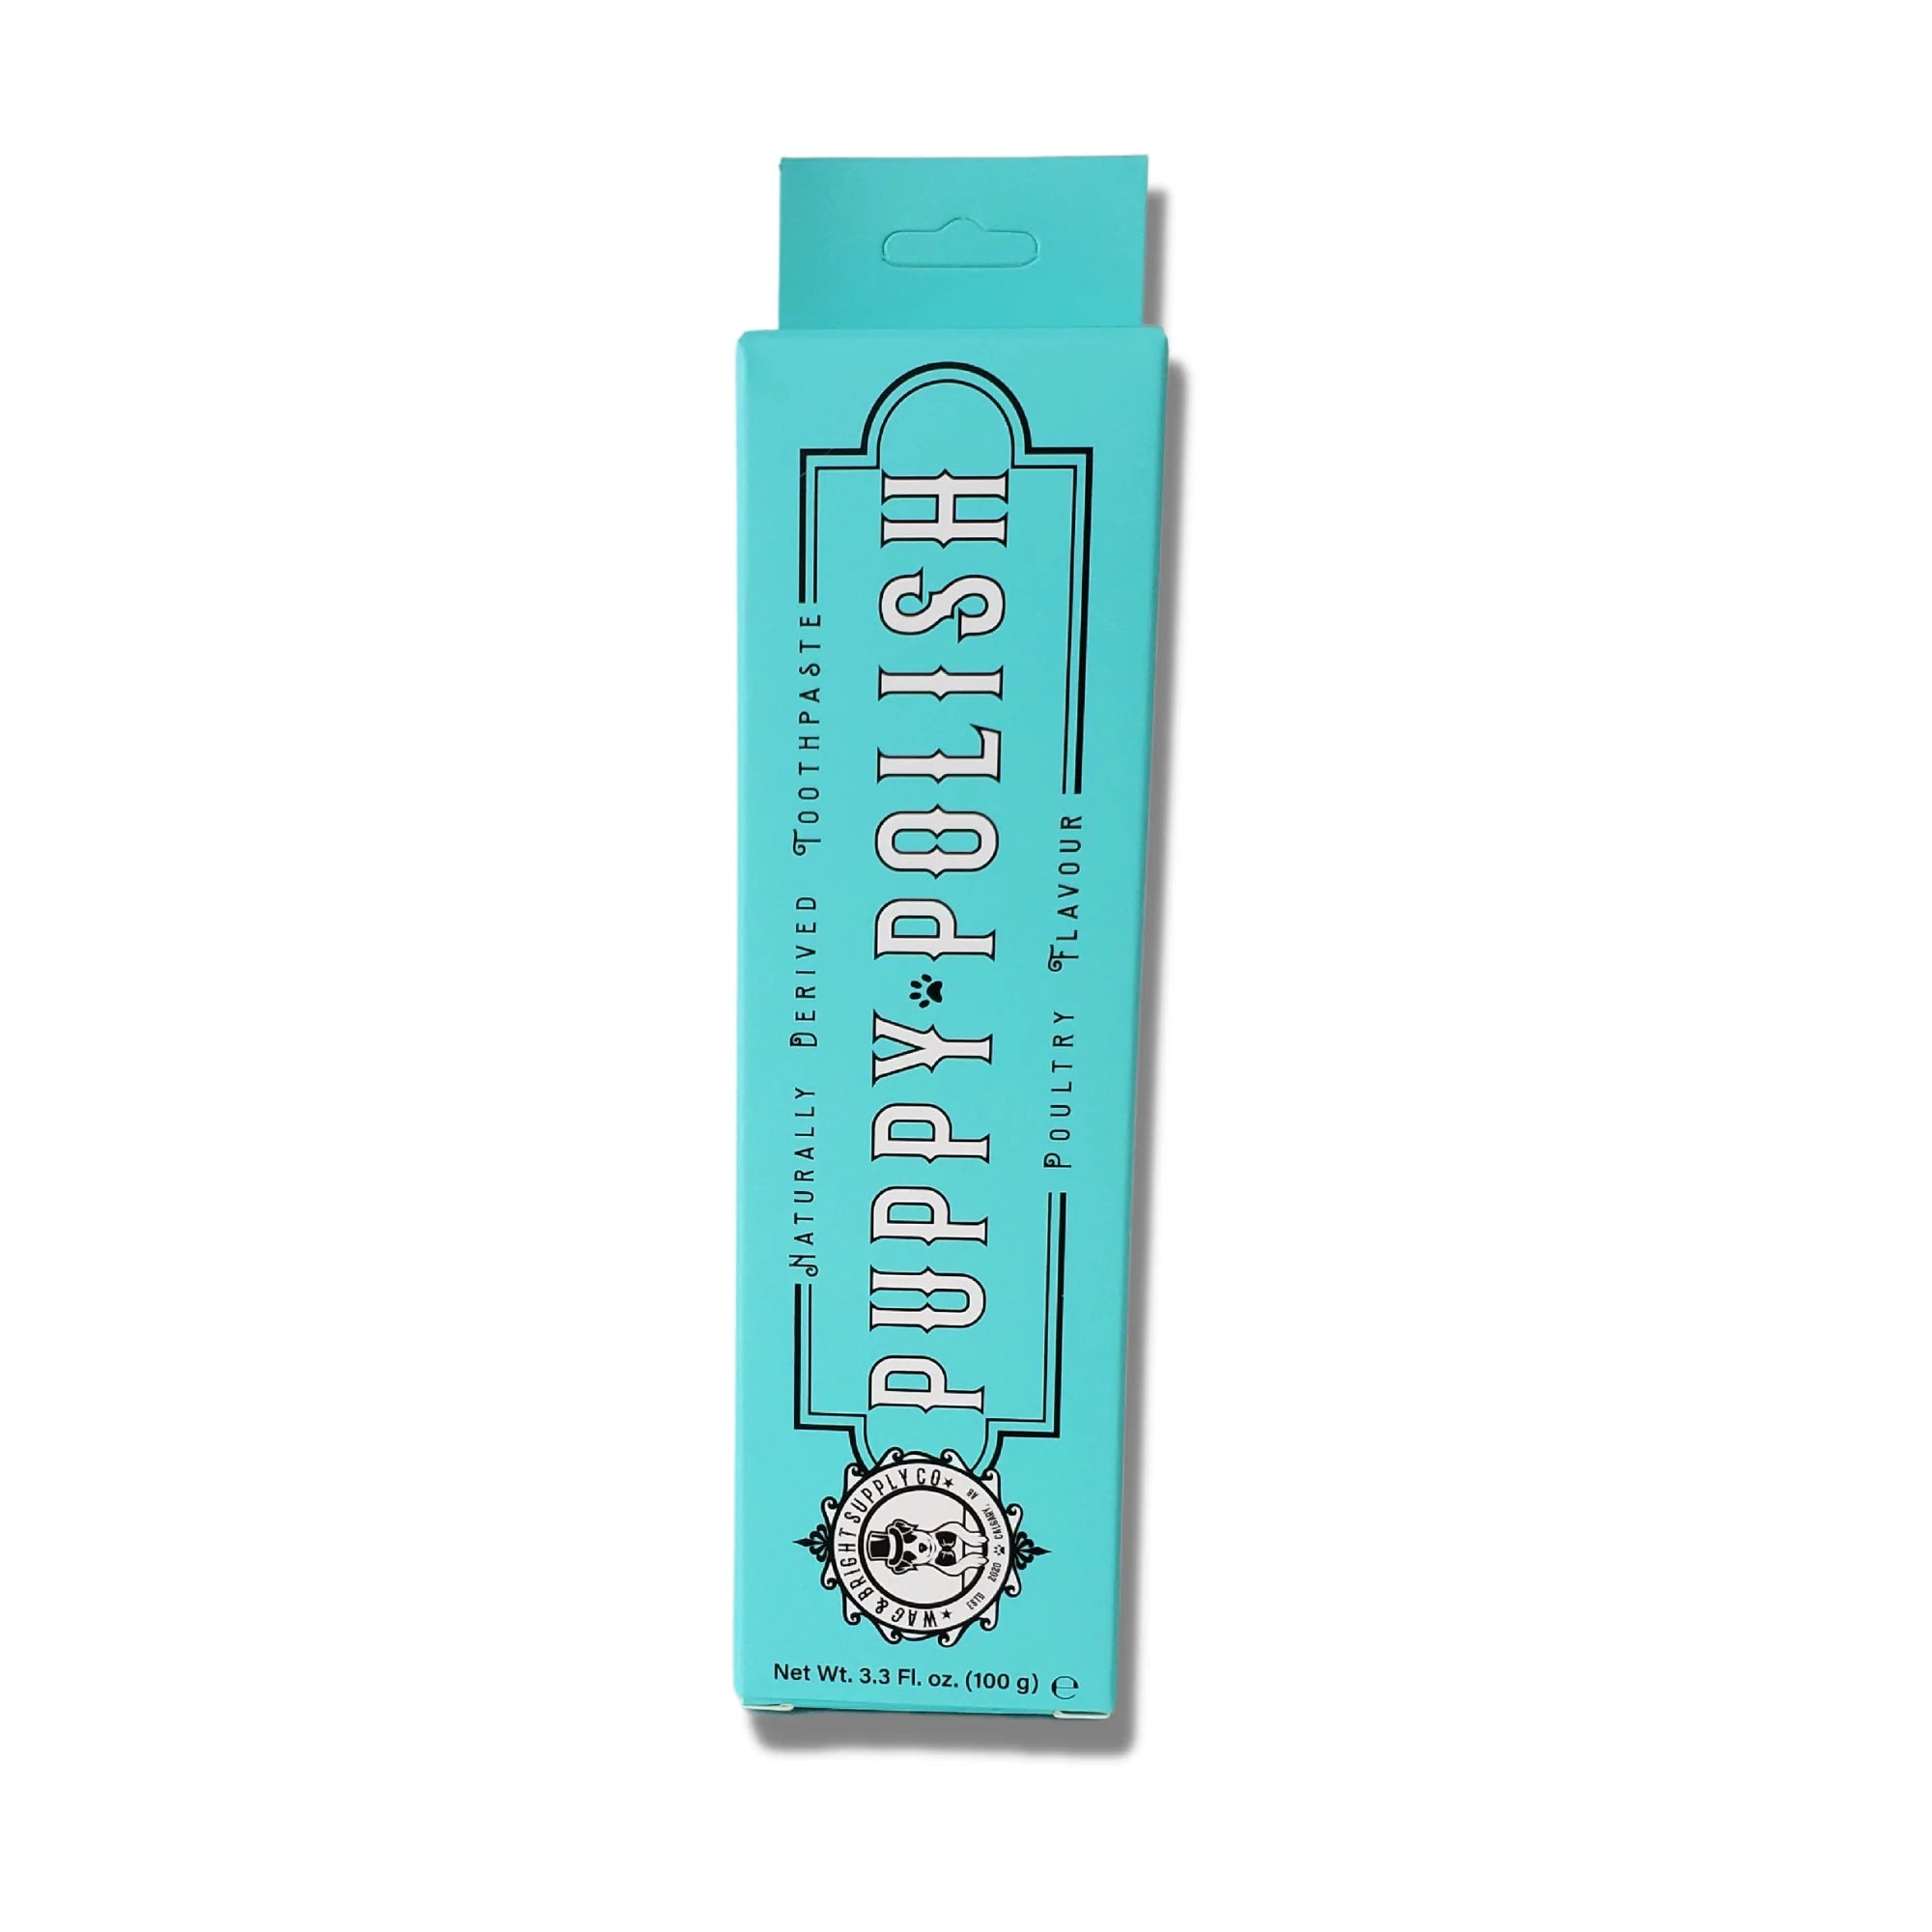 Puppy Polish Natural Dog Toothpaste